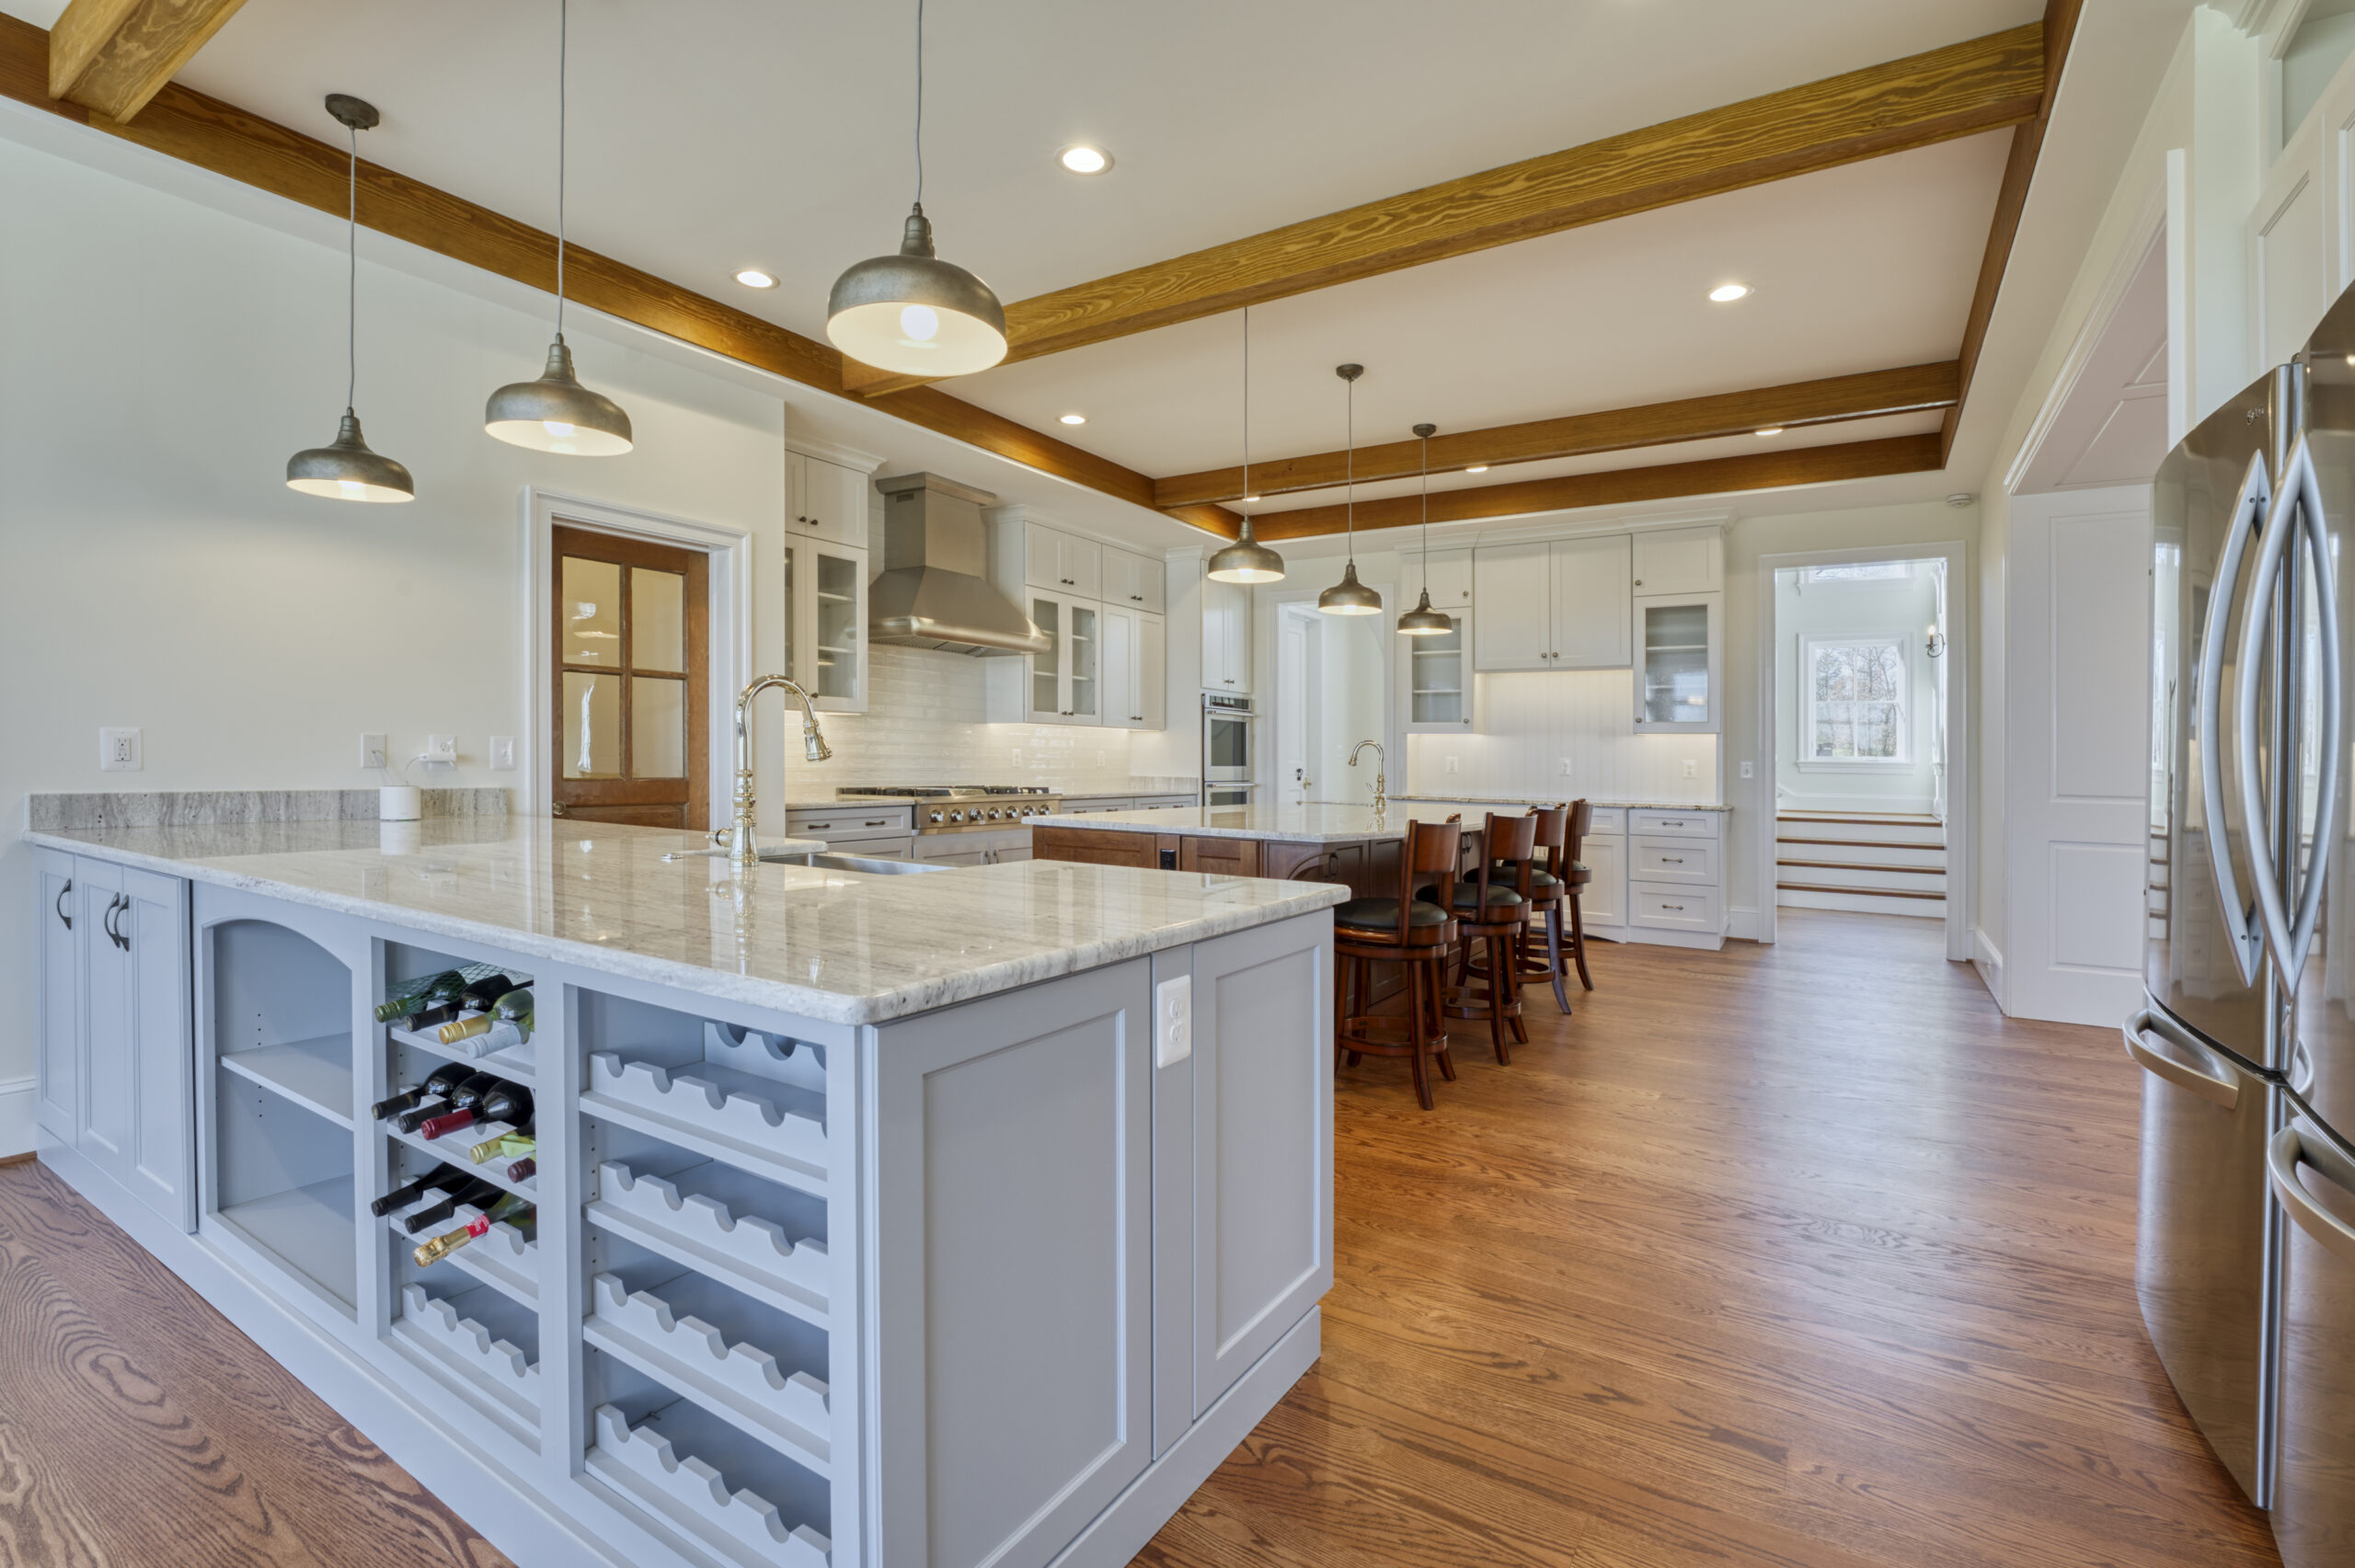 Professional interior photo of custom build new home by Black Oak Construction - showing the kitchen with exposed wood beams in the white ceiling, large island centered in front of the range with stainless hood, wrap around counters with stainless appliances and farmer's sink and hardwood floors. built in wine racks in the foreground